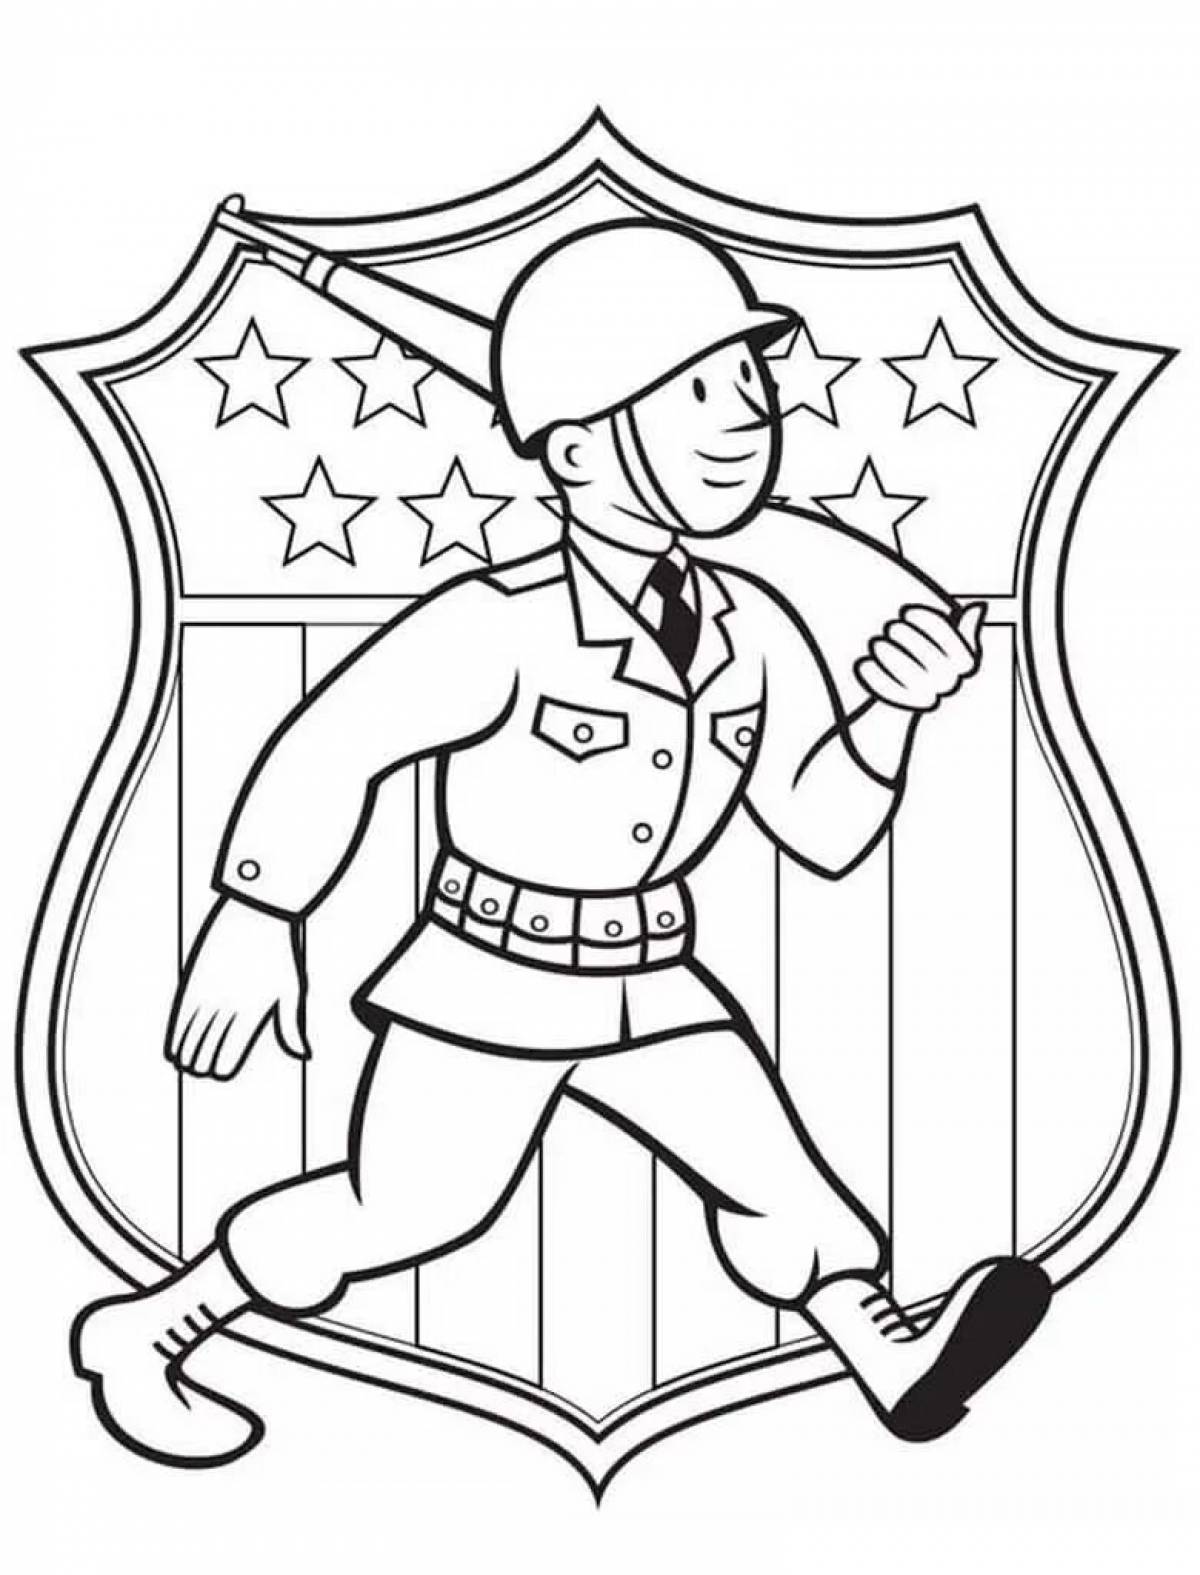 Playful toy soldiers coloring book for boys